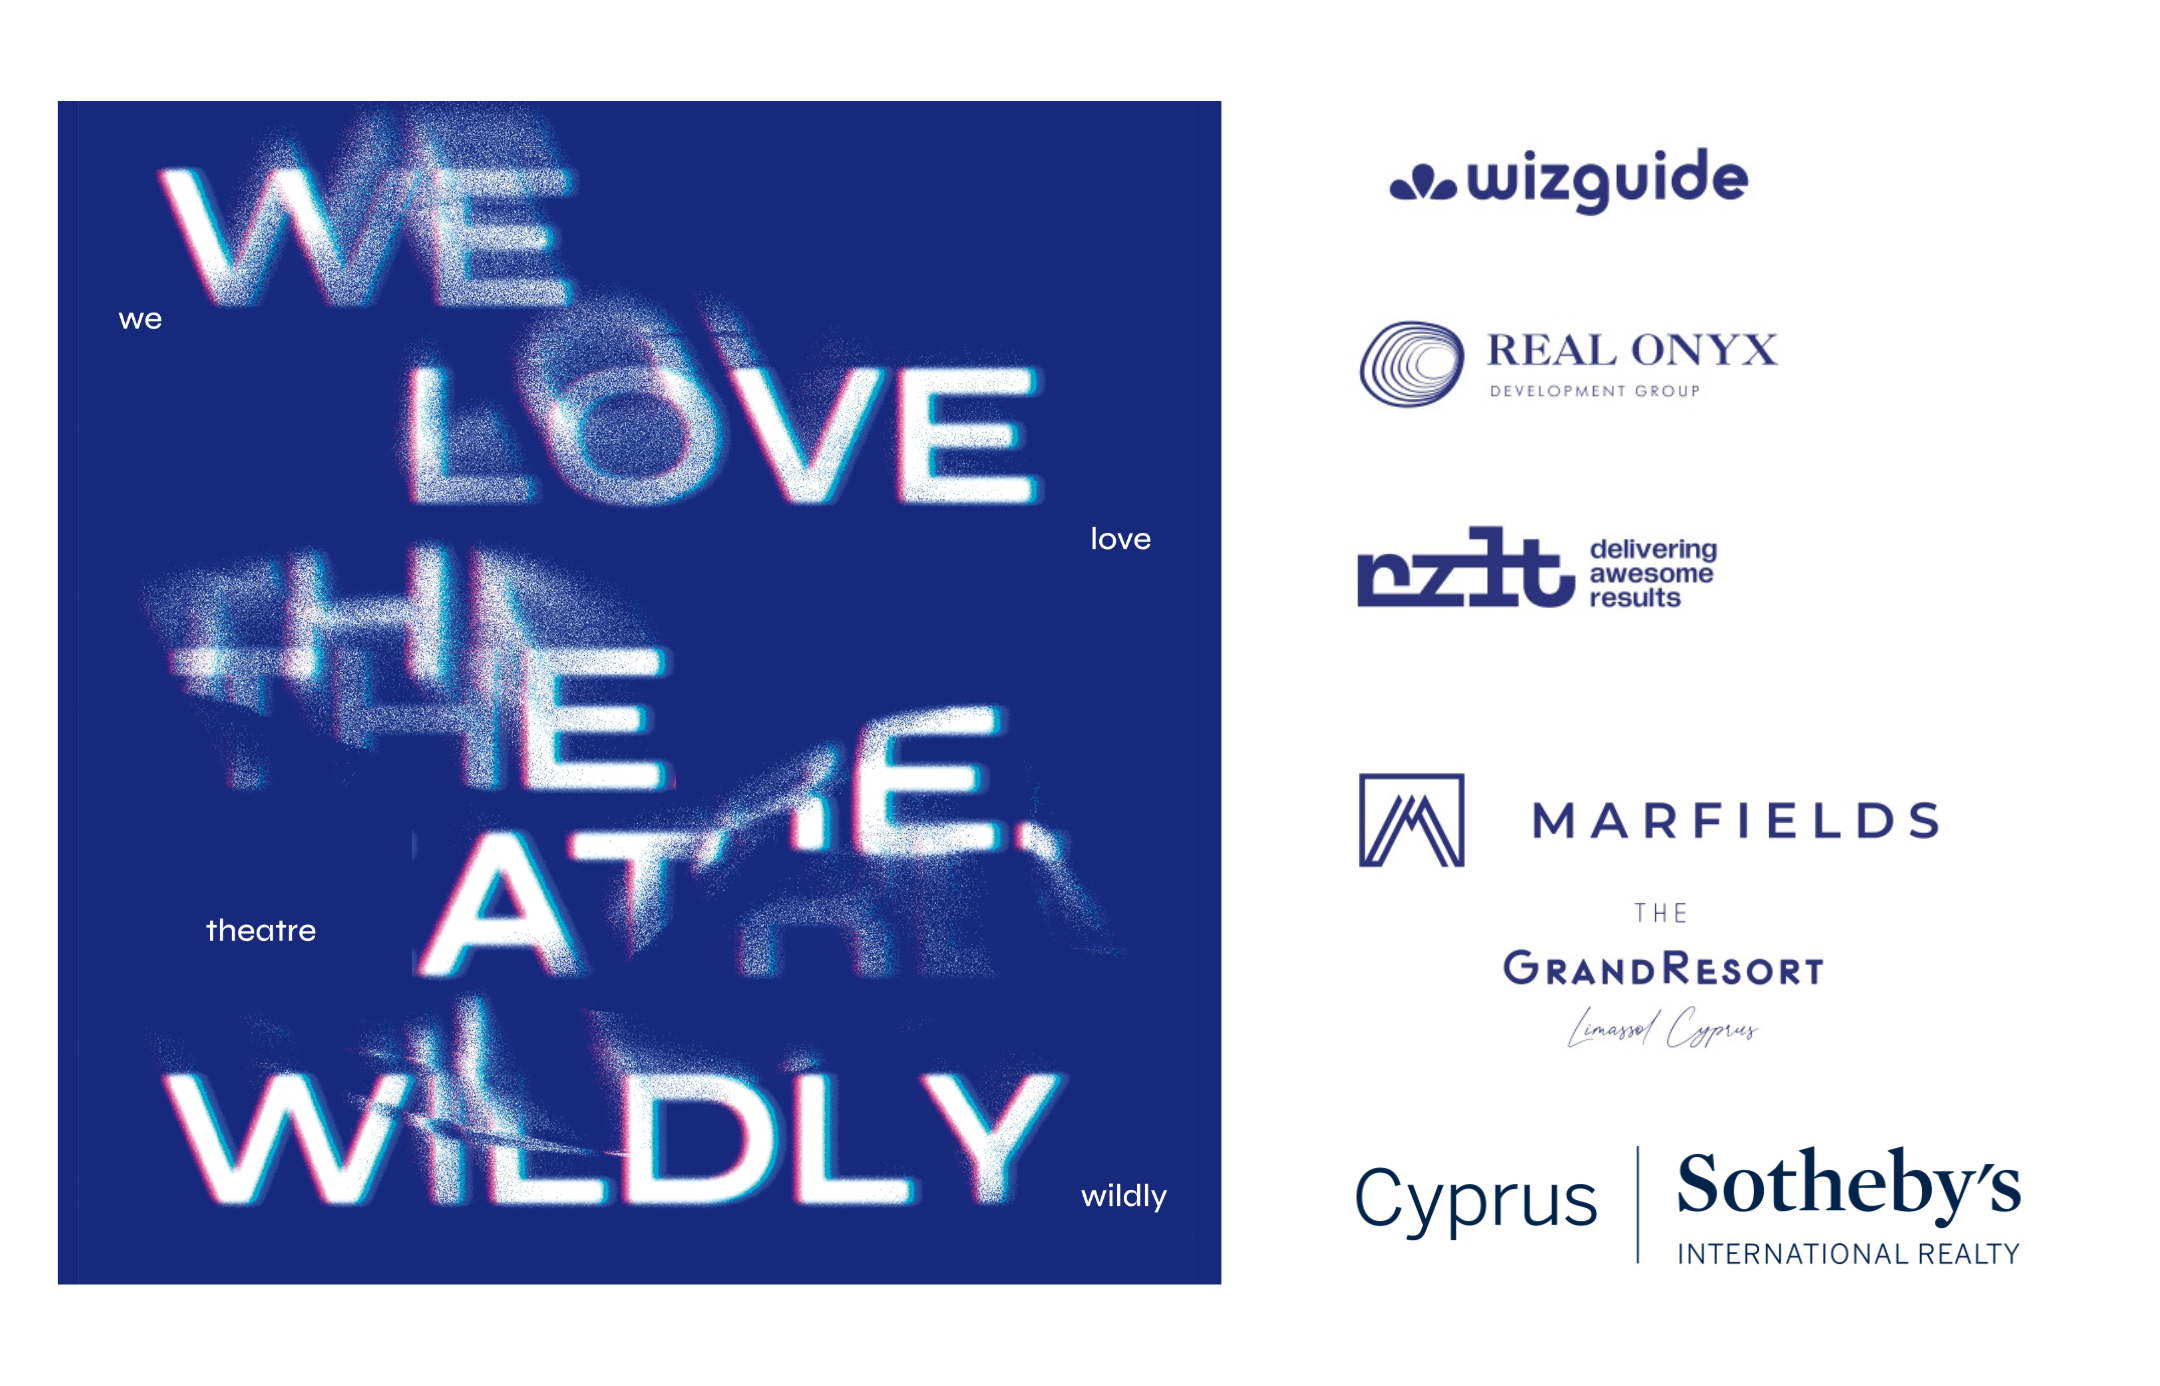 Cyprus Sotheby’s International Realty is one of the key partners for the first-ever CITF festival